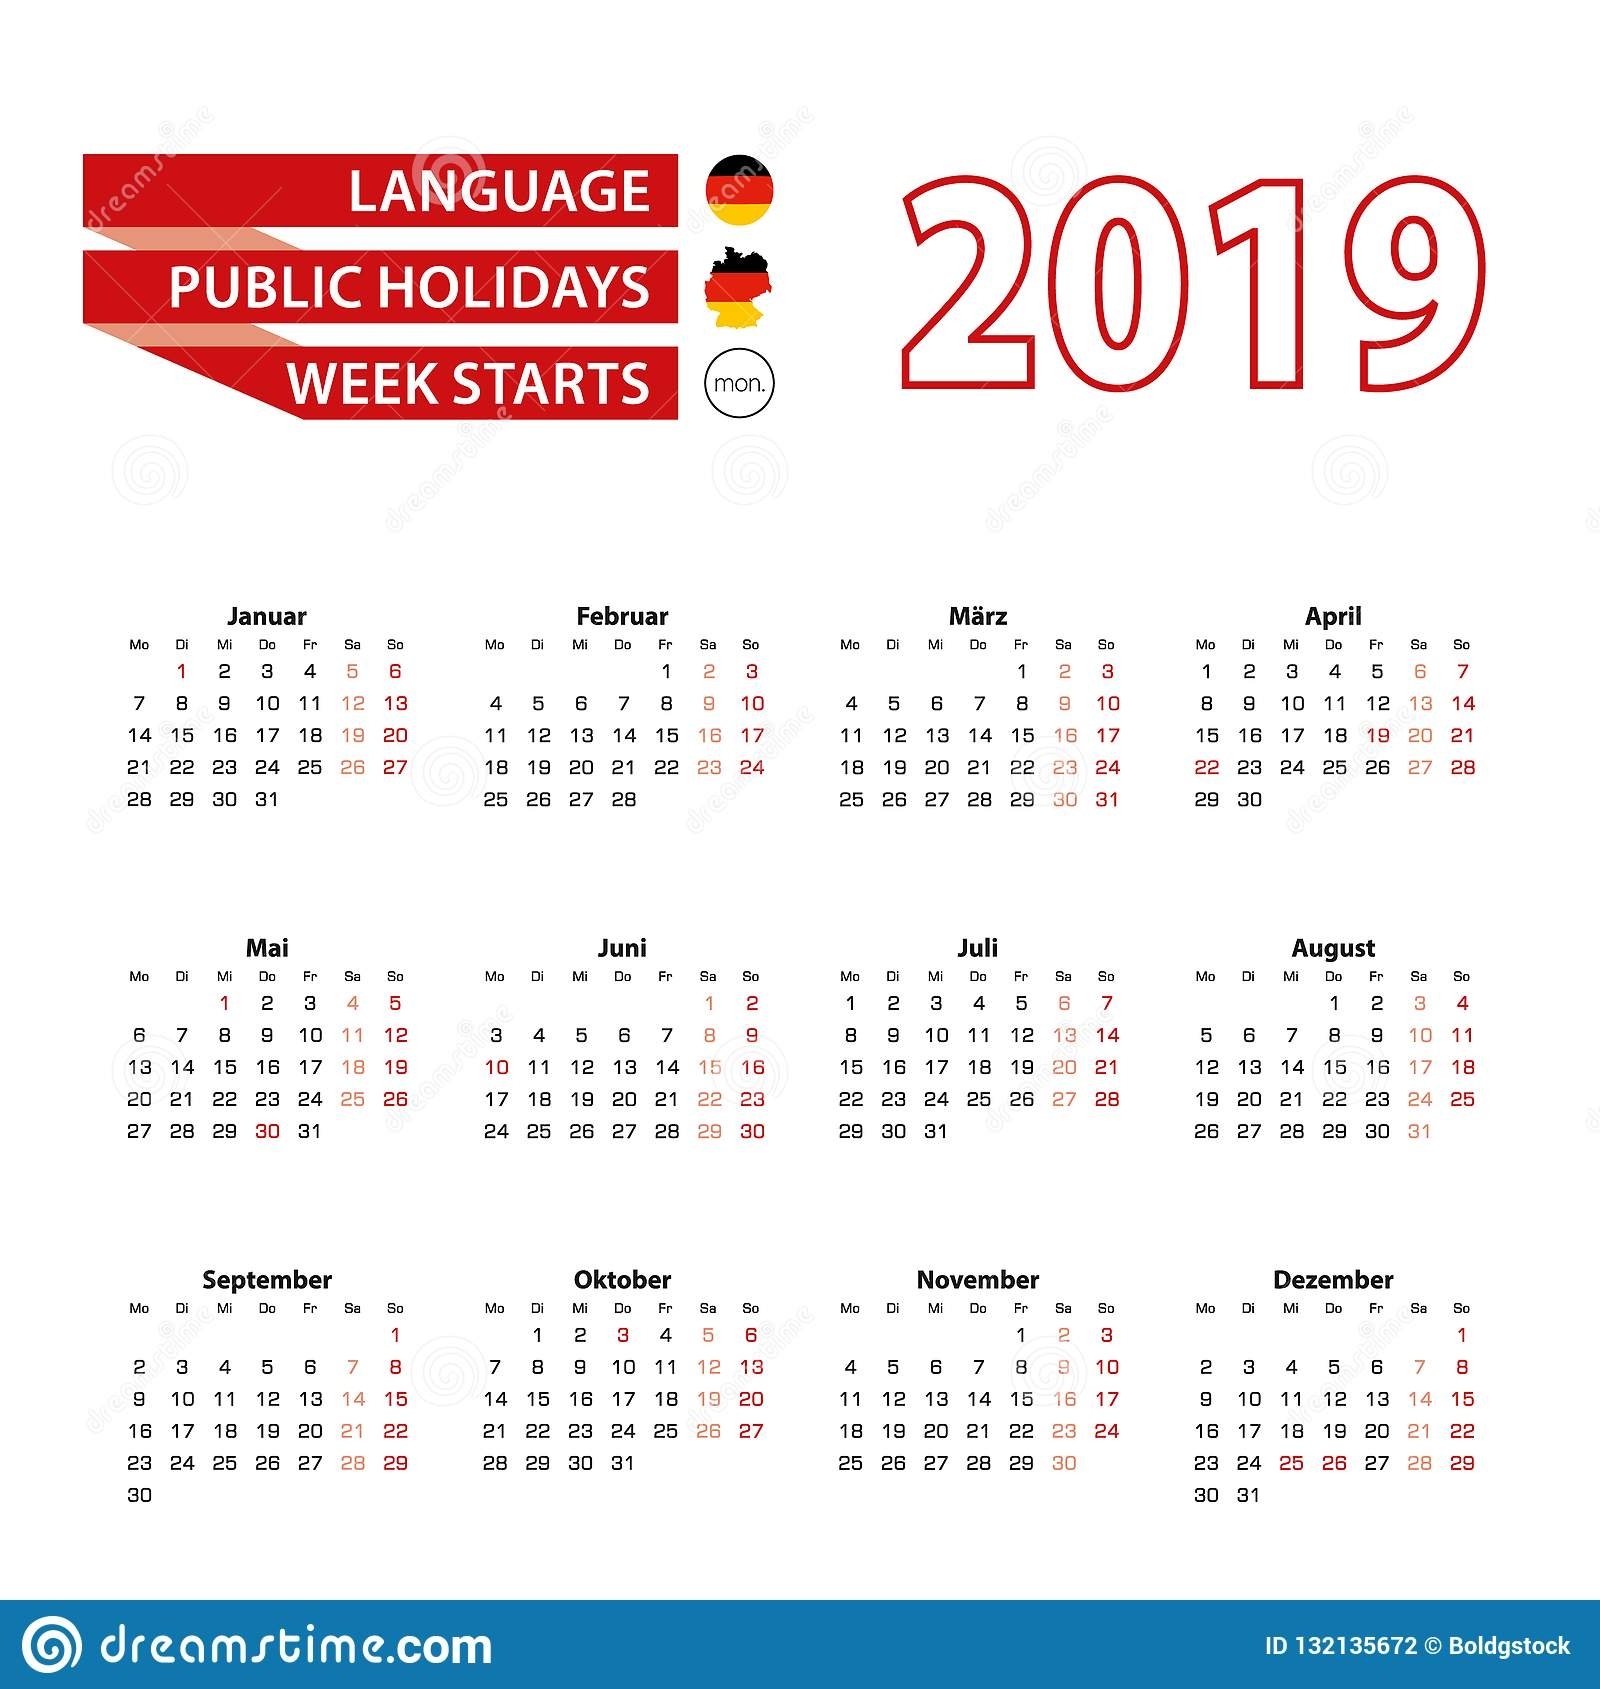 Calendar 2019 In Germany Language With Public Holidays The Count Calendar Public Holidays Germany